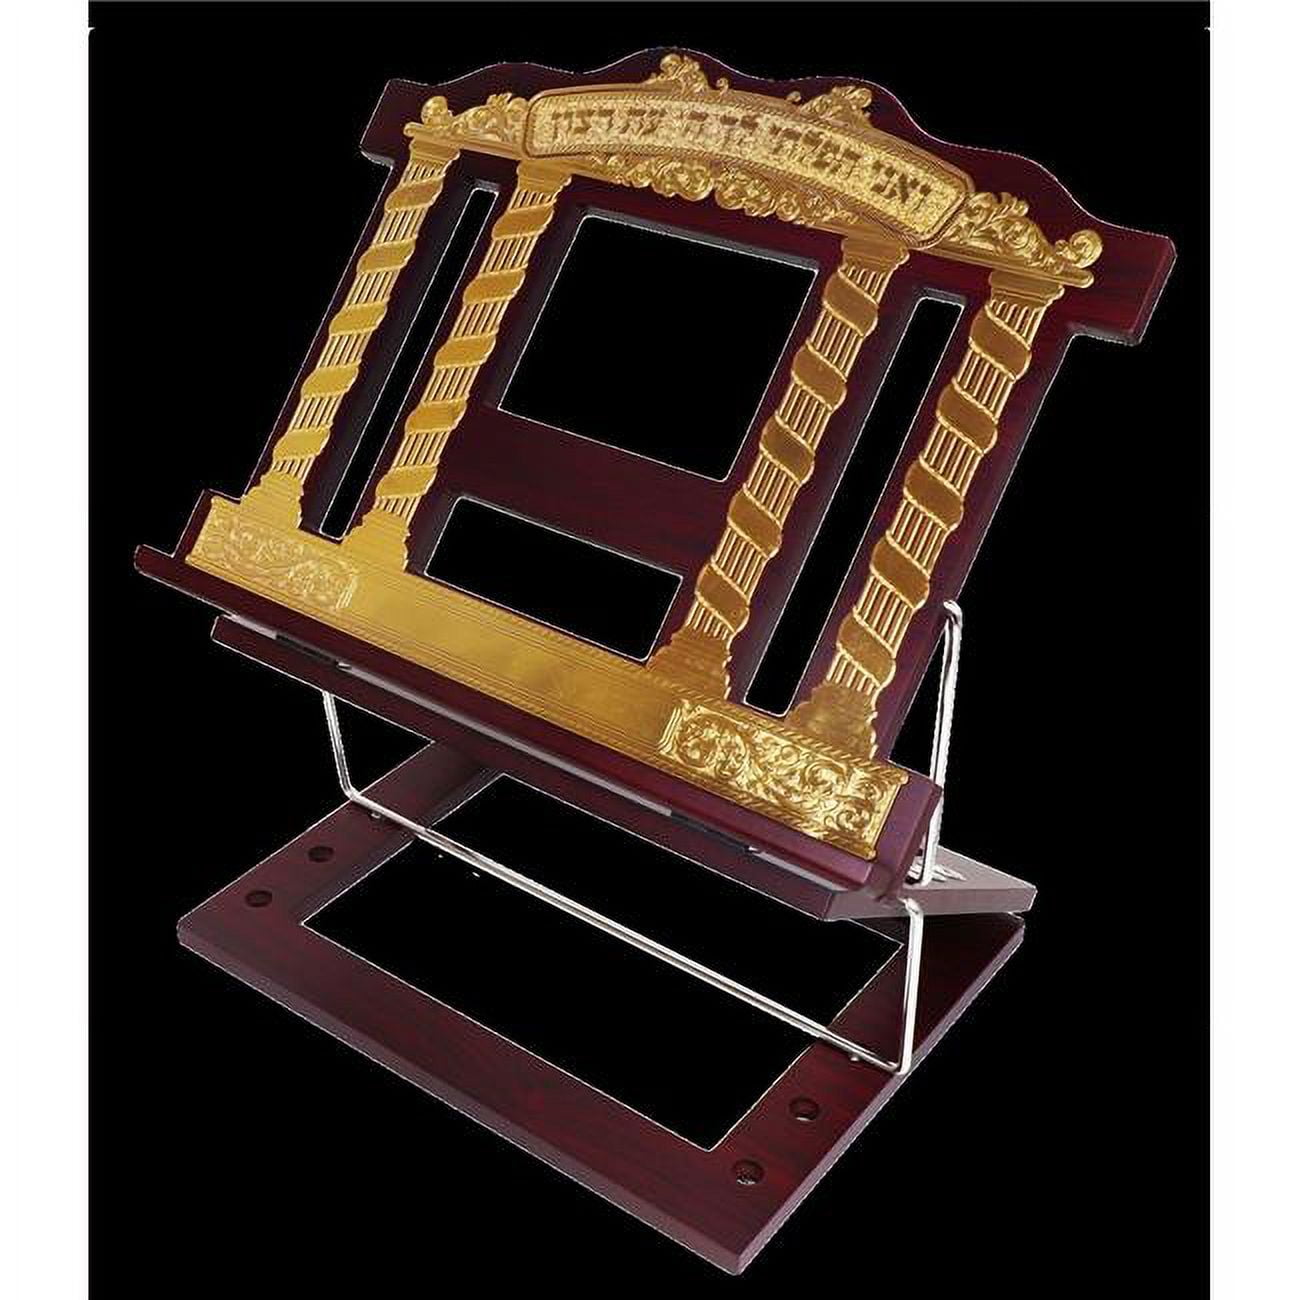 Picture of Nua 58364-3 15 x 12 in. Wooden 2 Tone Book Stand & Shtender 2 Position with Full Gold Plate